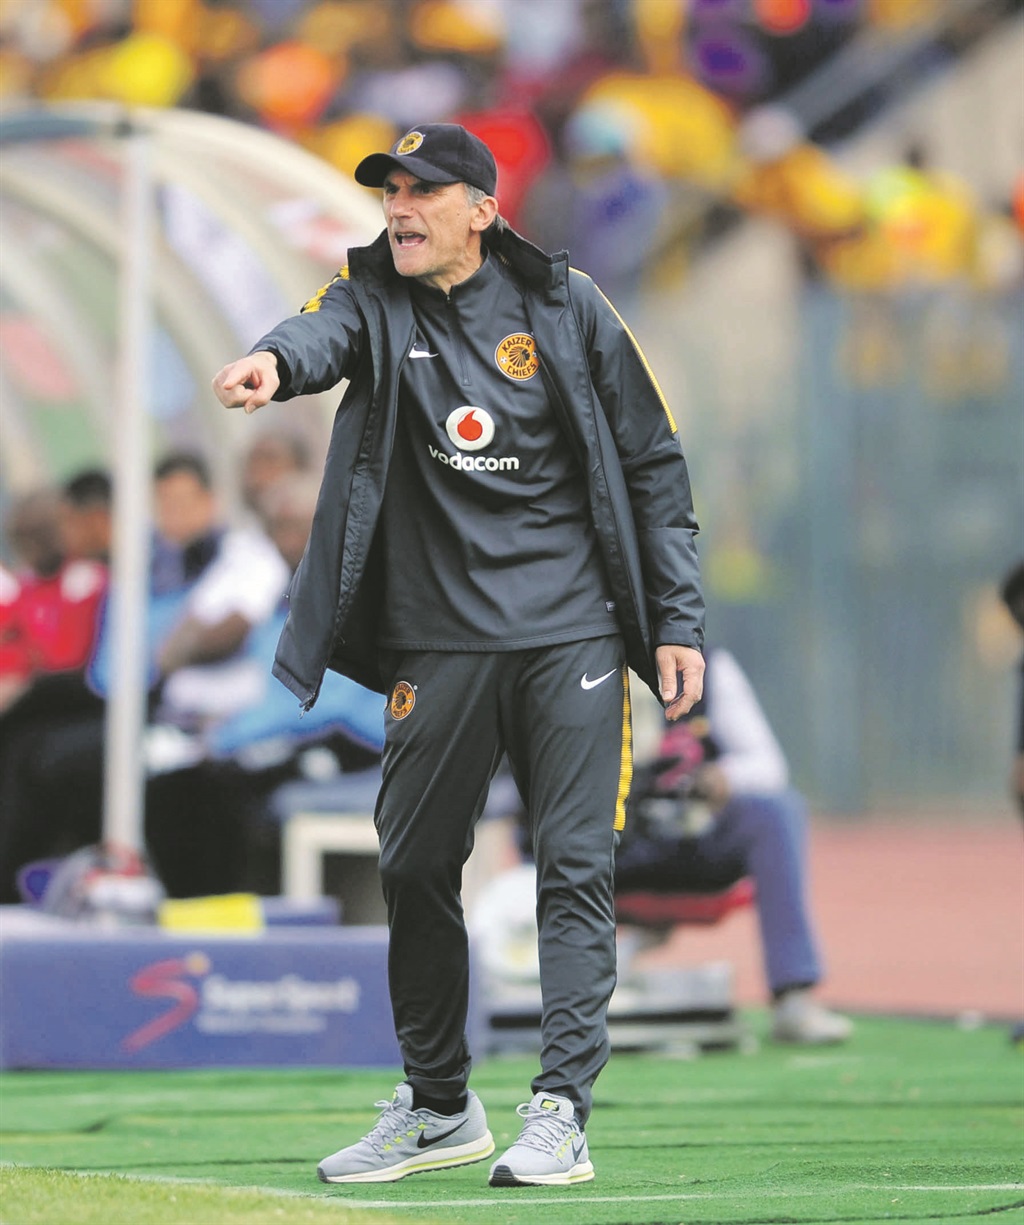 Giovanni Solinas aims to guide Kaizer Chiefs to their second league win against Free State Stars.Photo by Backpagepix